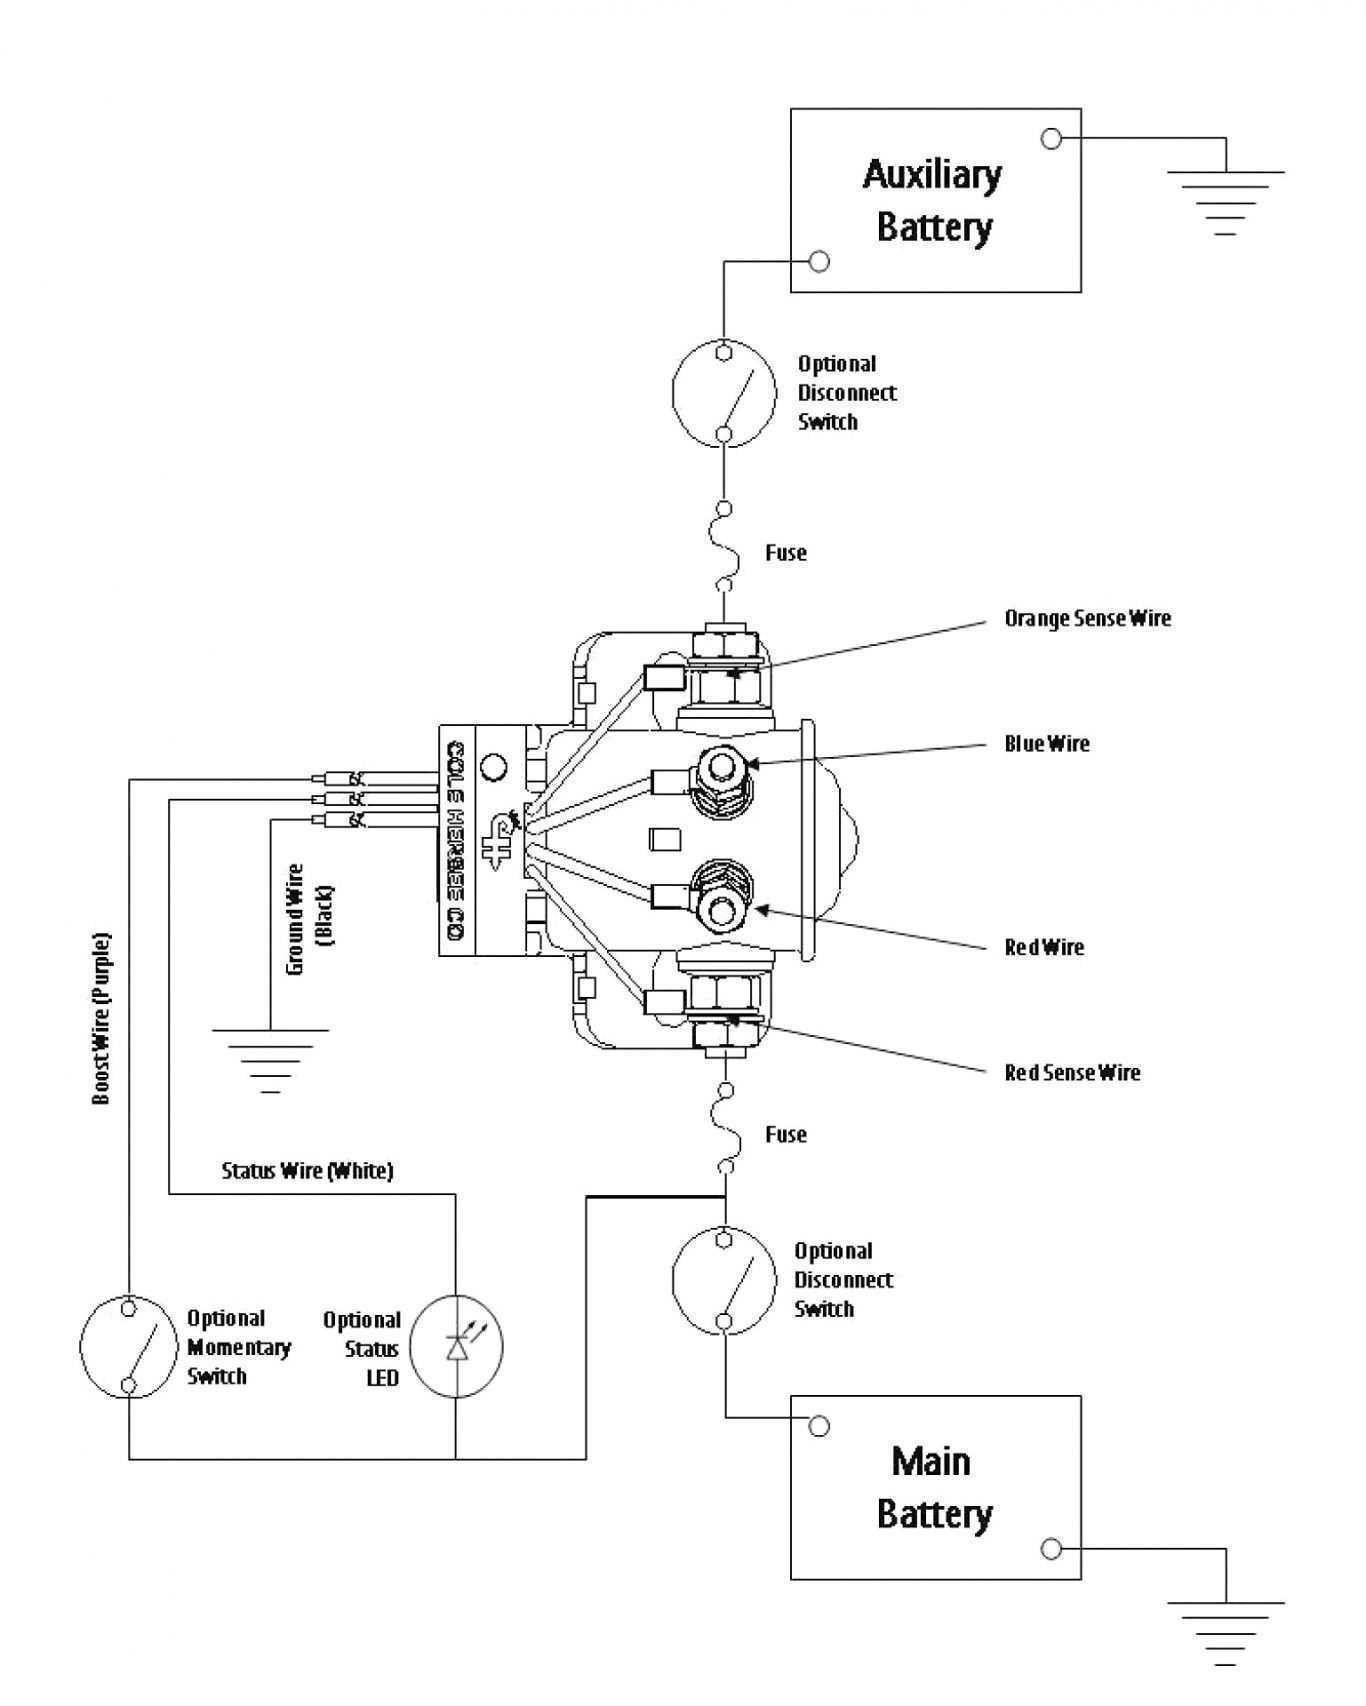 Wiring Diagram Car Stereo New Wiring Diagram for Car Audio System Refrence Boat Dual Battery